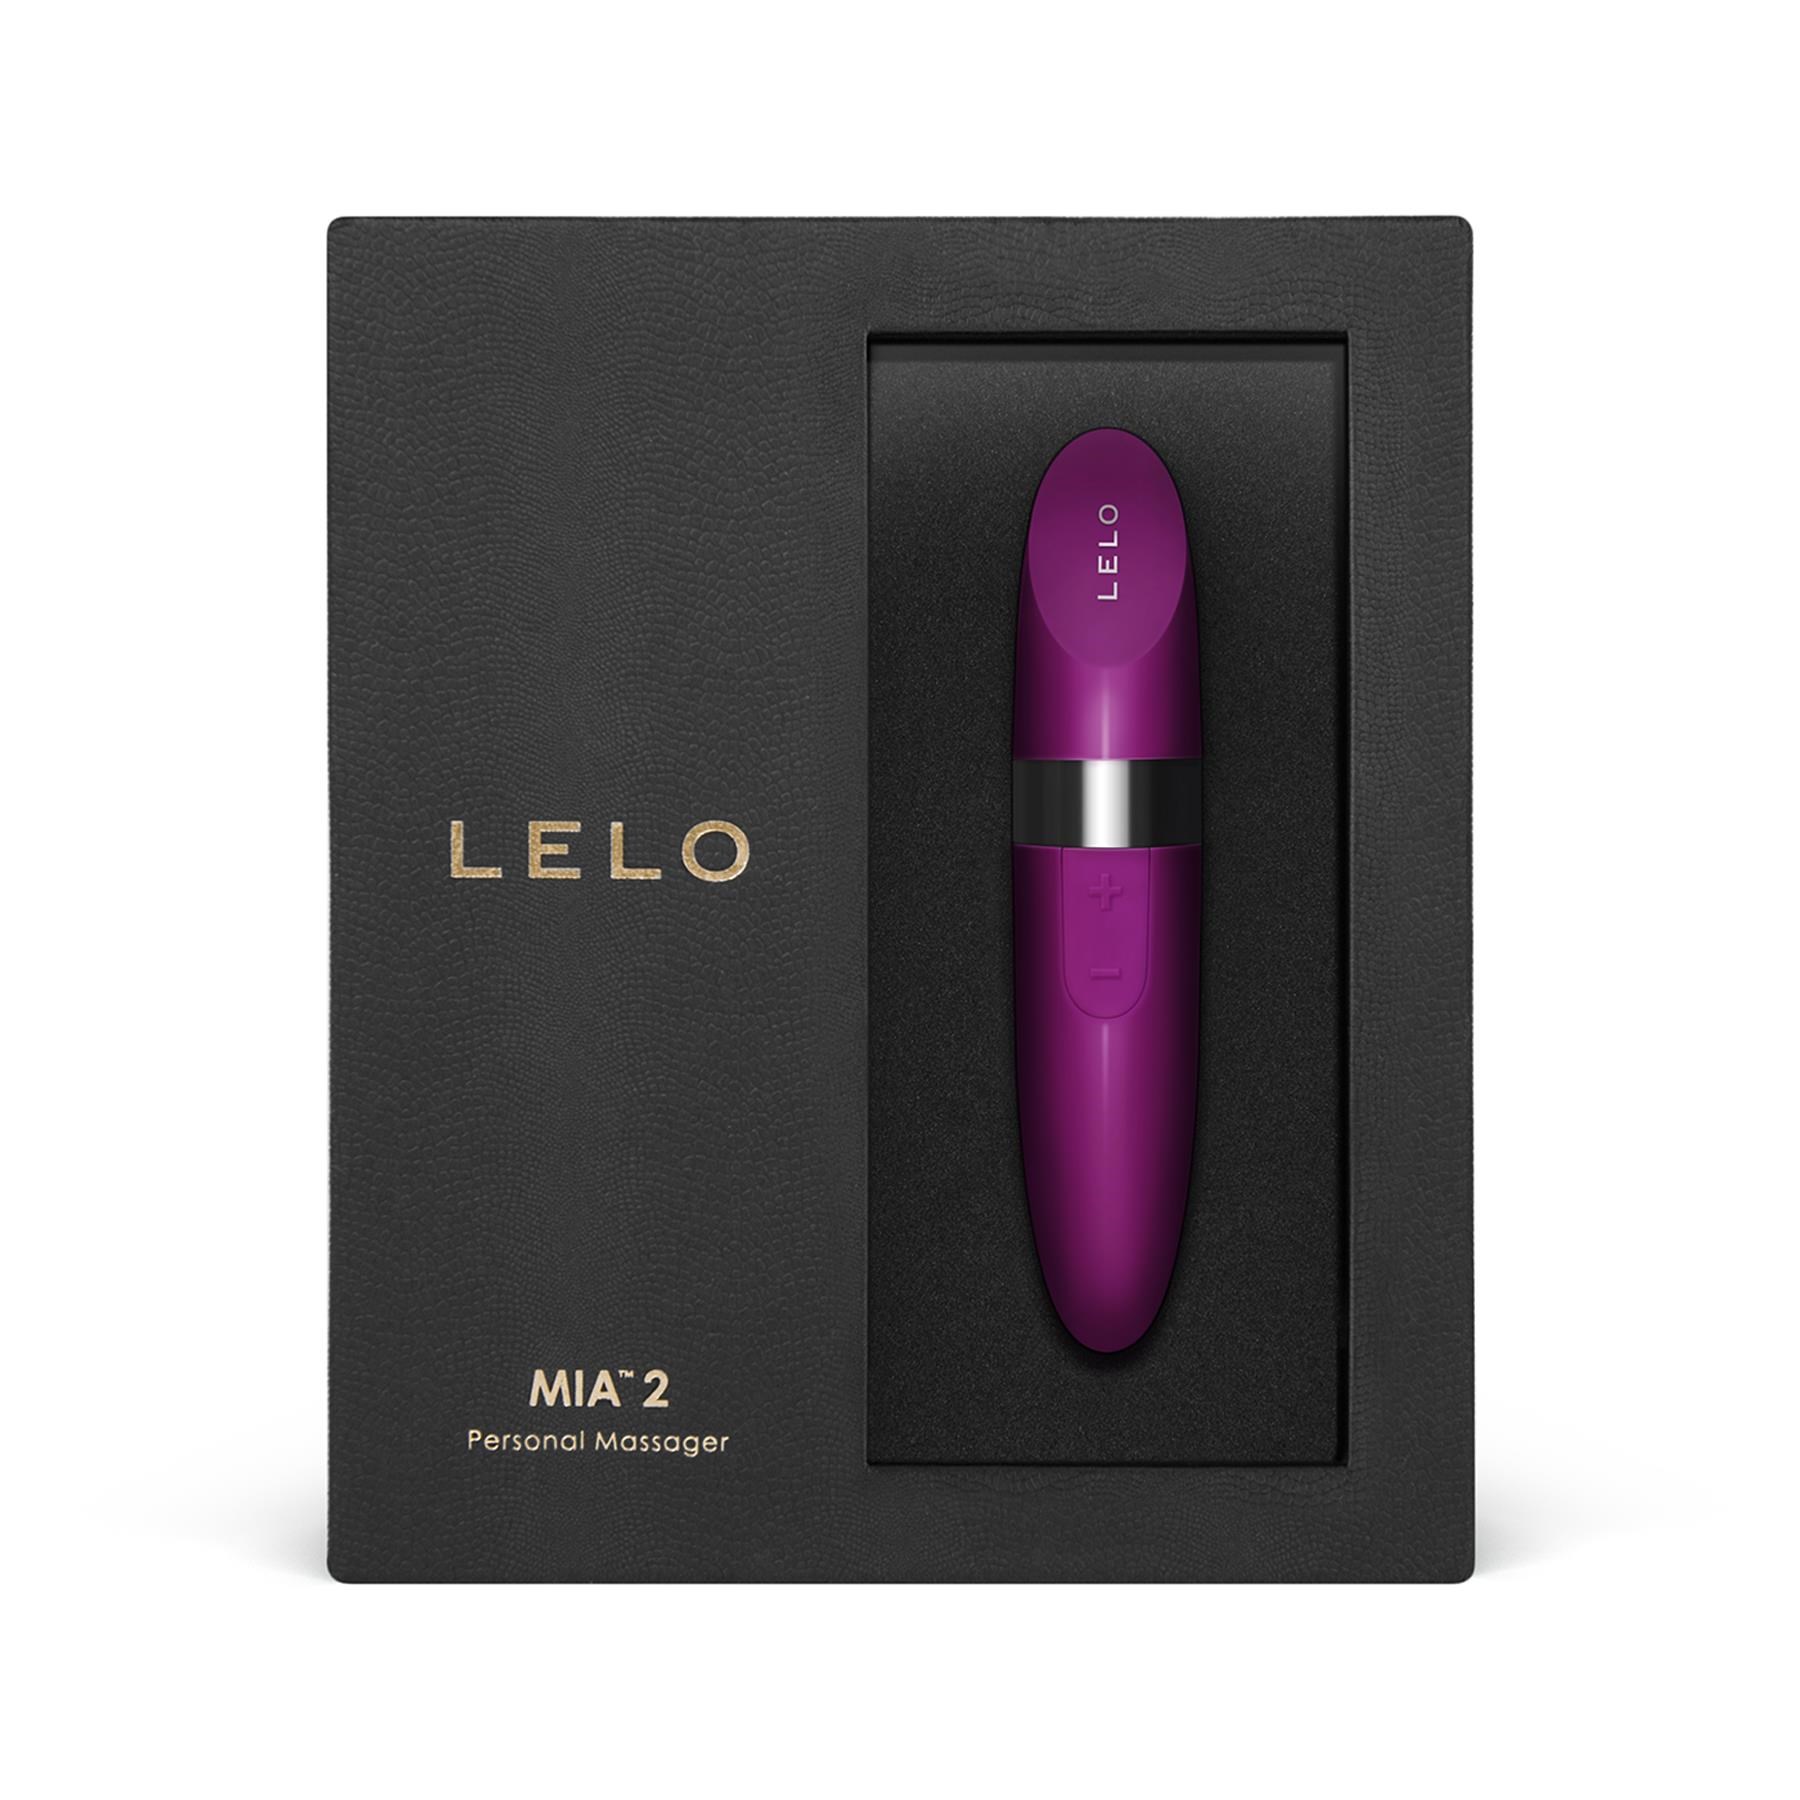 Lelo Mia 2 Personal Massager - Packaging